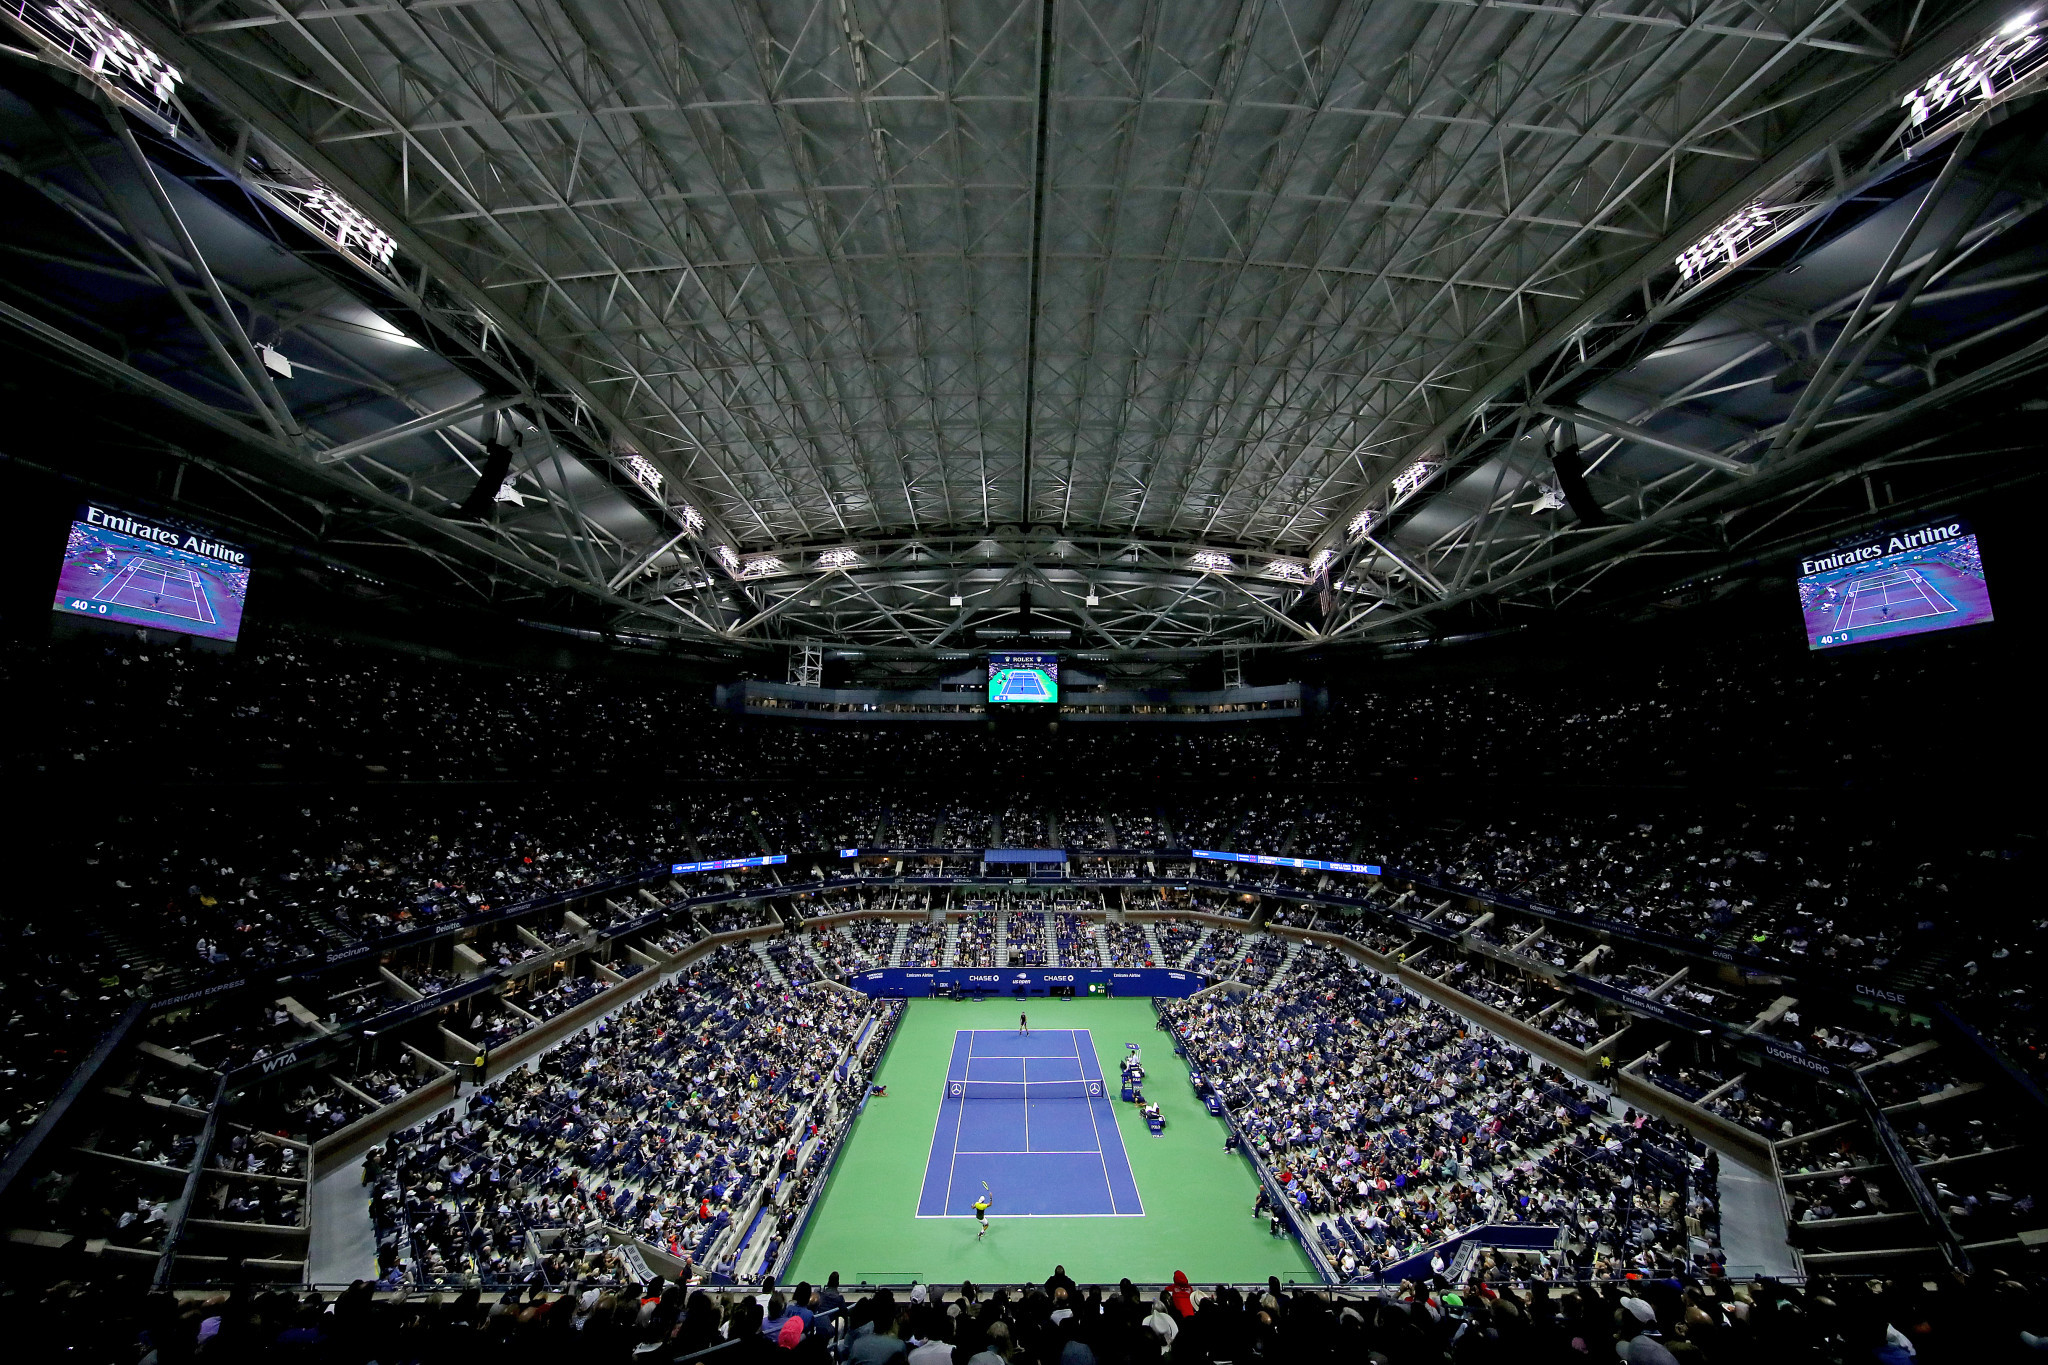 US Open to require spectators to have COVID-19 vaccine days before start of Grand Slam